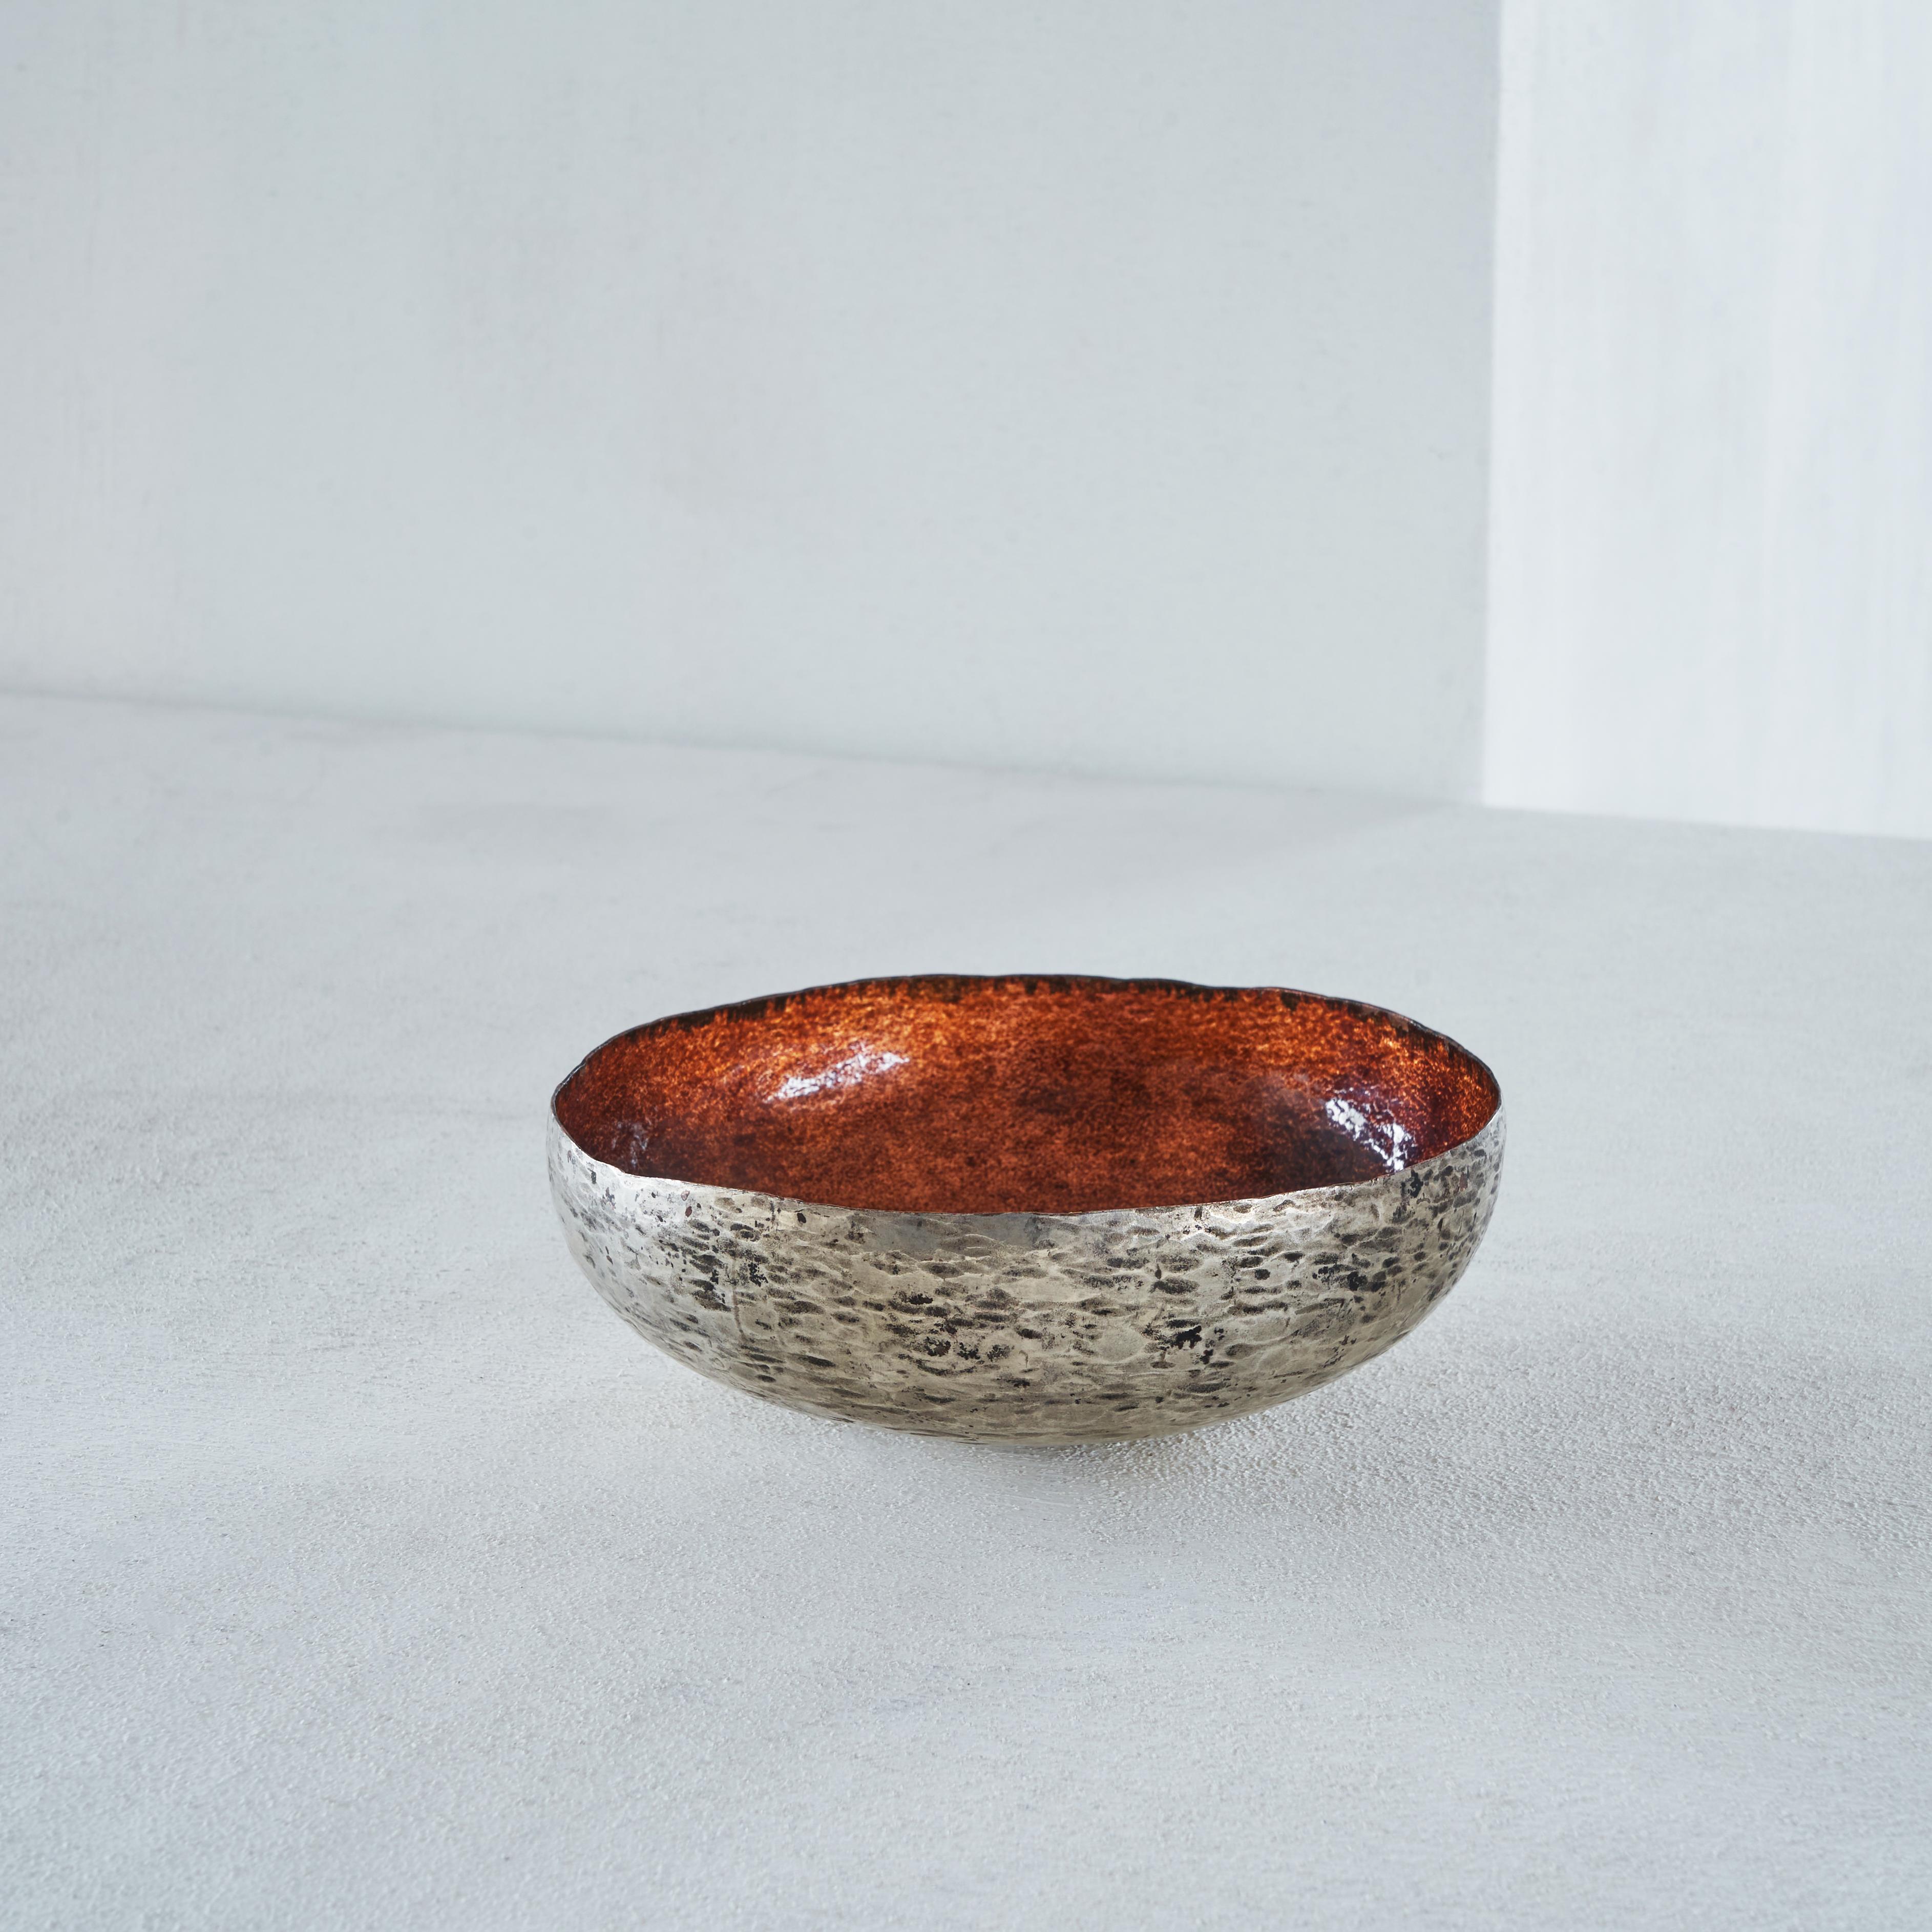 Hand hammered and enamelled bowl by Renato Vanzelli, 1960s, Italy.

This is one of the most beautiful bowls we've ever seen. A true jewel for your interior. This beautiful bowl by Renato Vanzelli (1932-1993) from Padova (Padua) in Italy is very